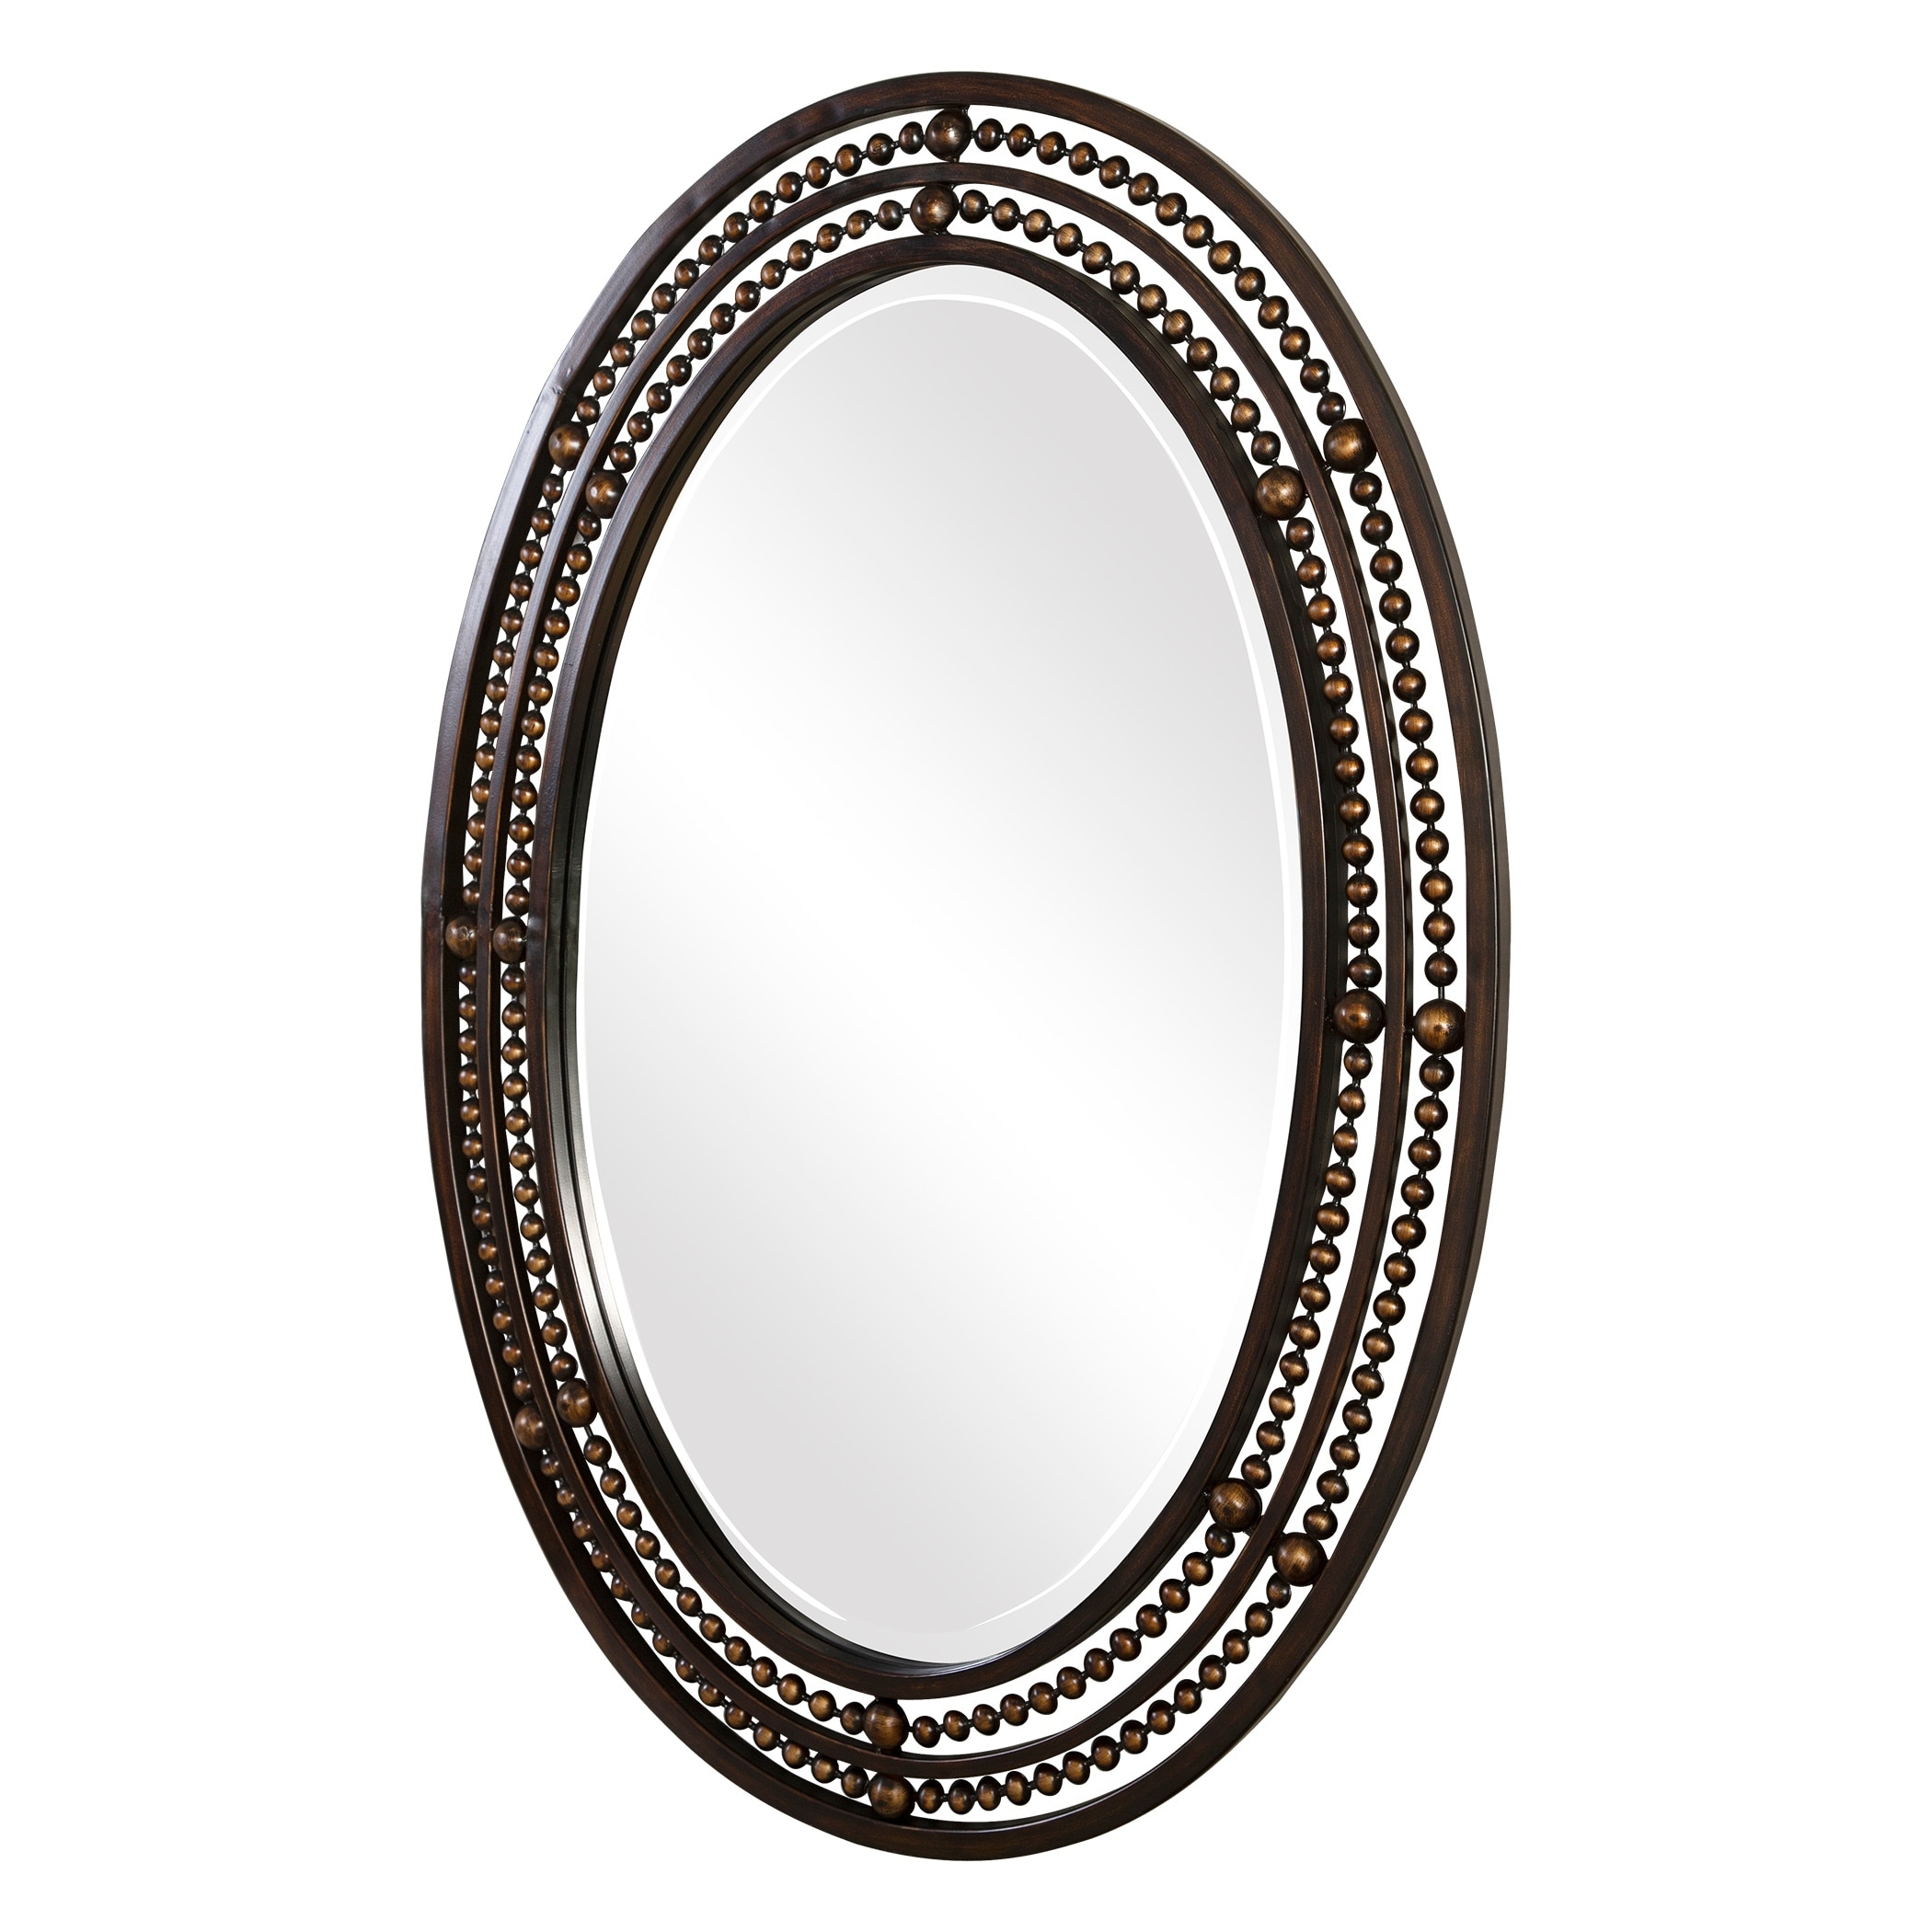 Oil Rubbed Bronze Oval Beveled Mirror Bed Bath  Beyond 32208944